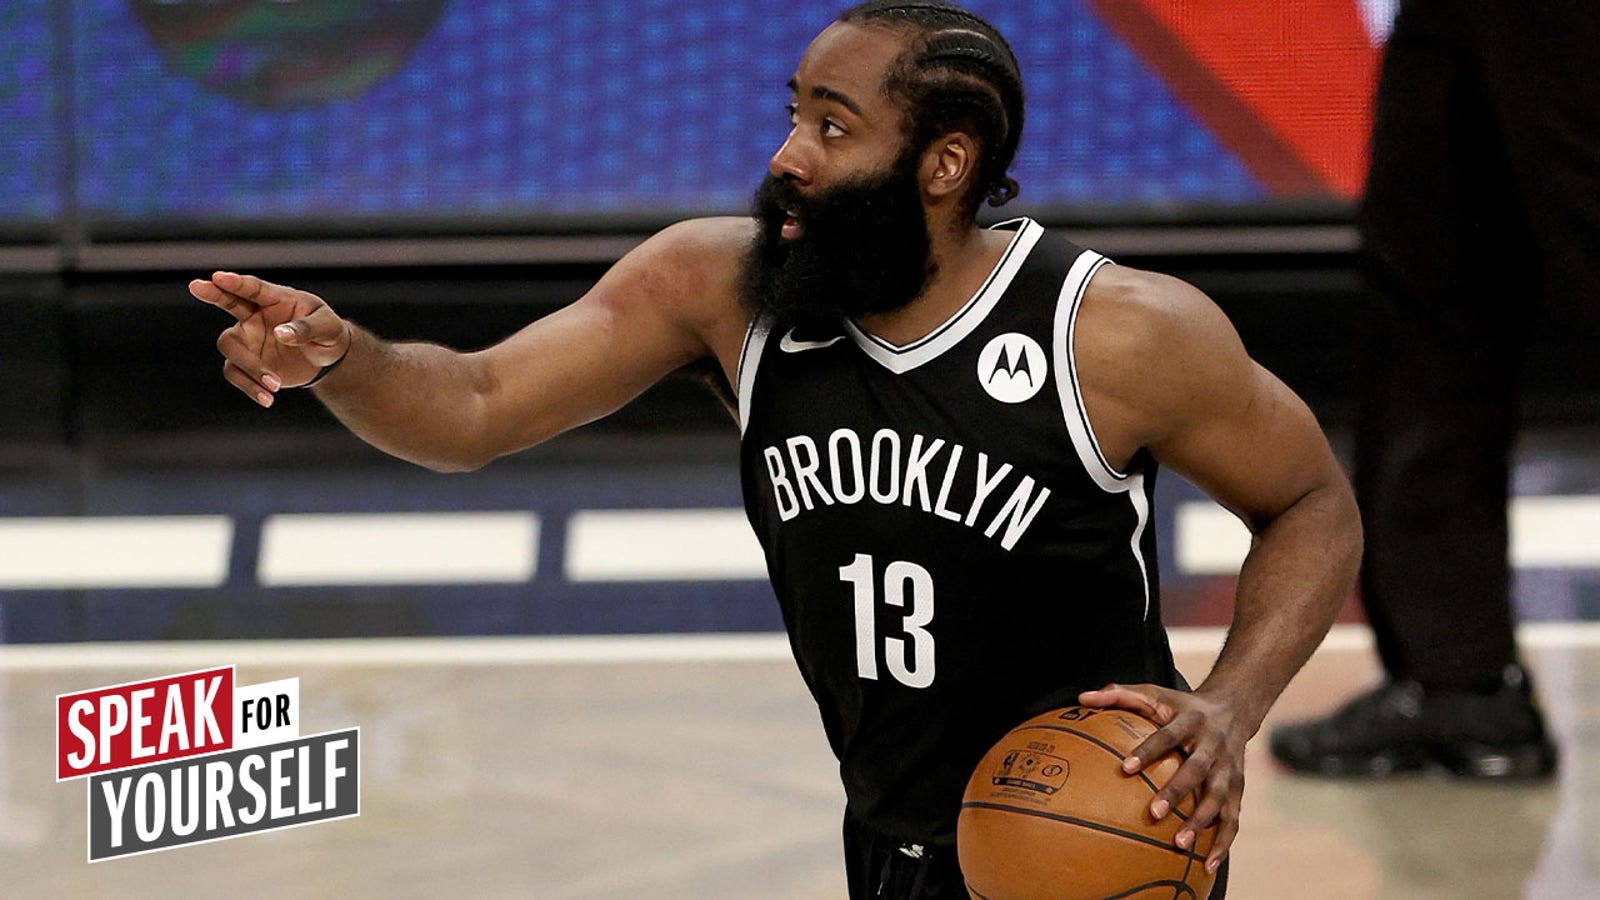 Marcellus Wiley: James Harden is right; the Nets are indeed unbeatable at full strength I SPEAK FOR YOURSELF